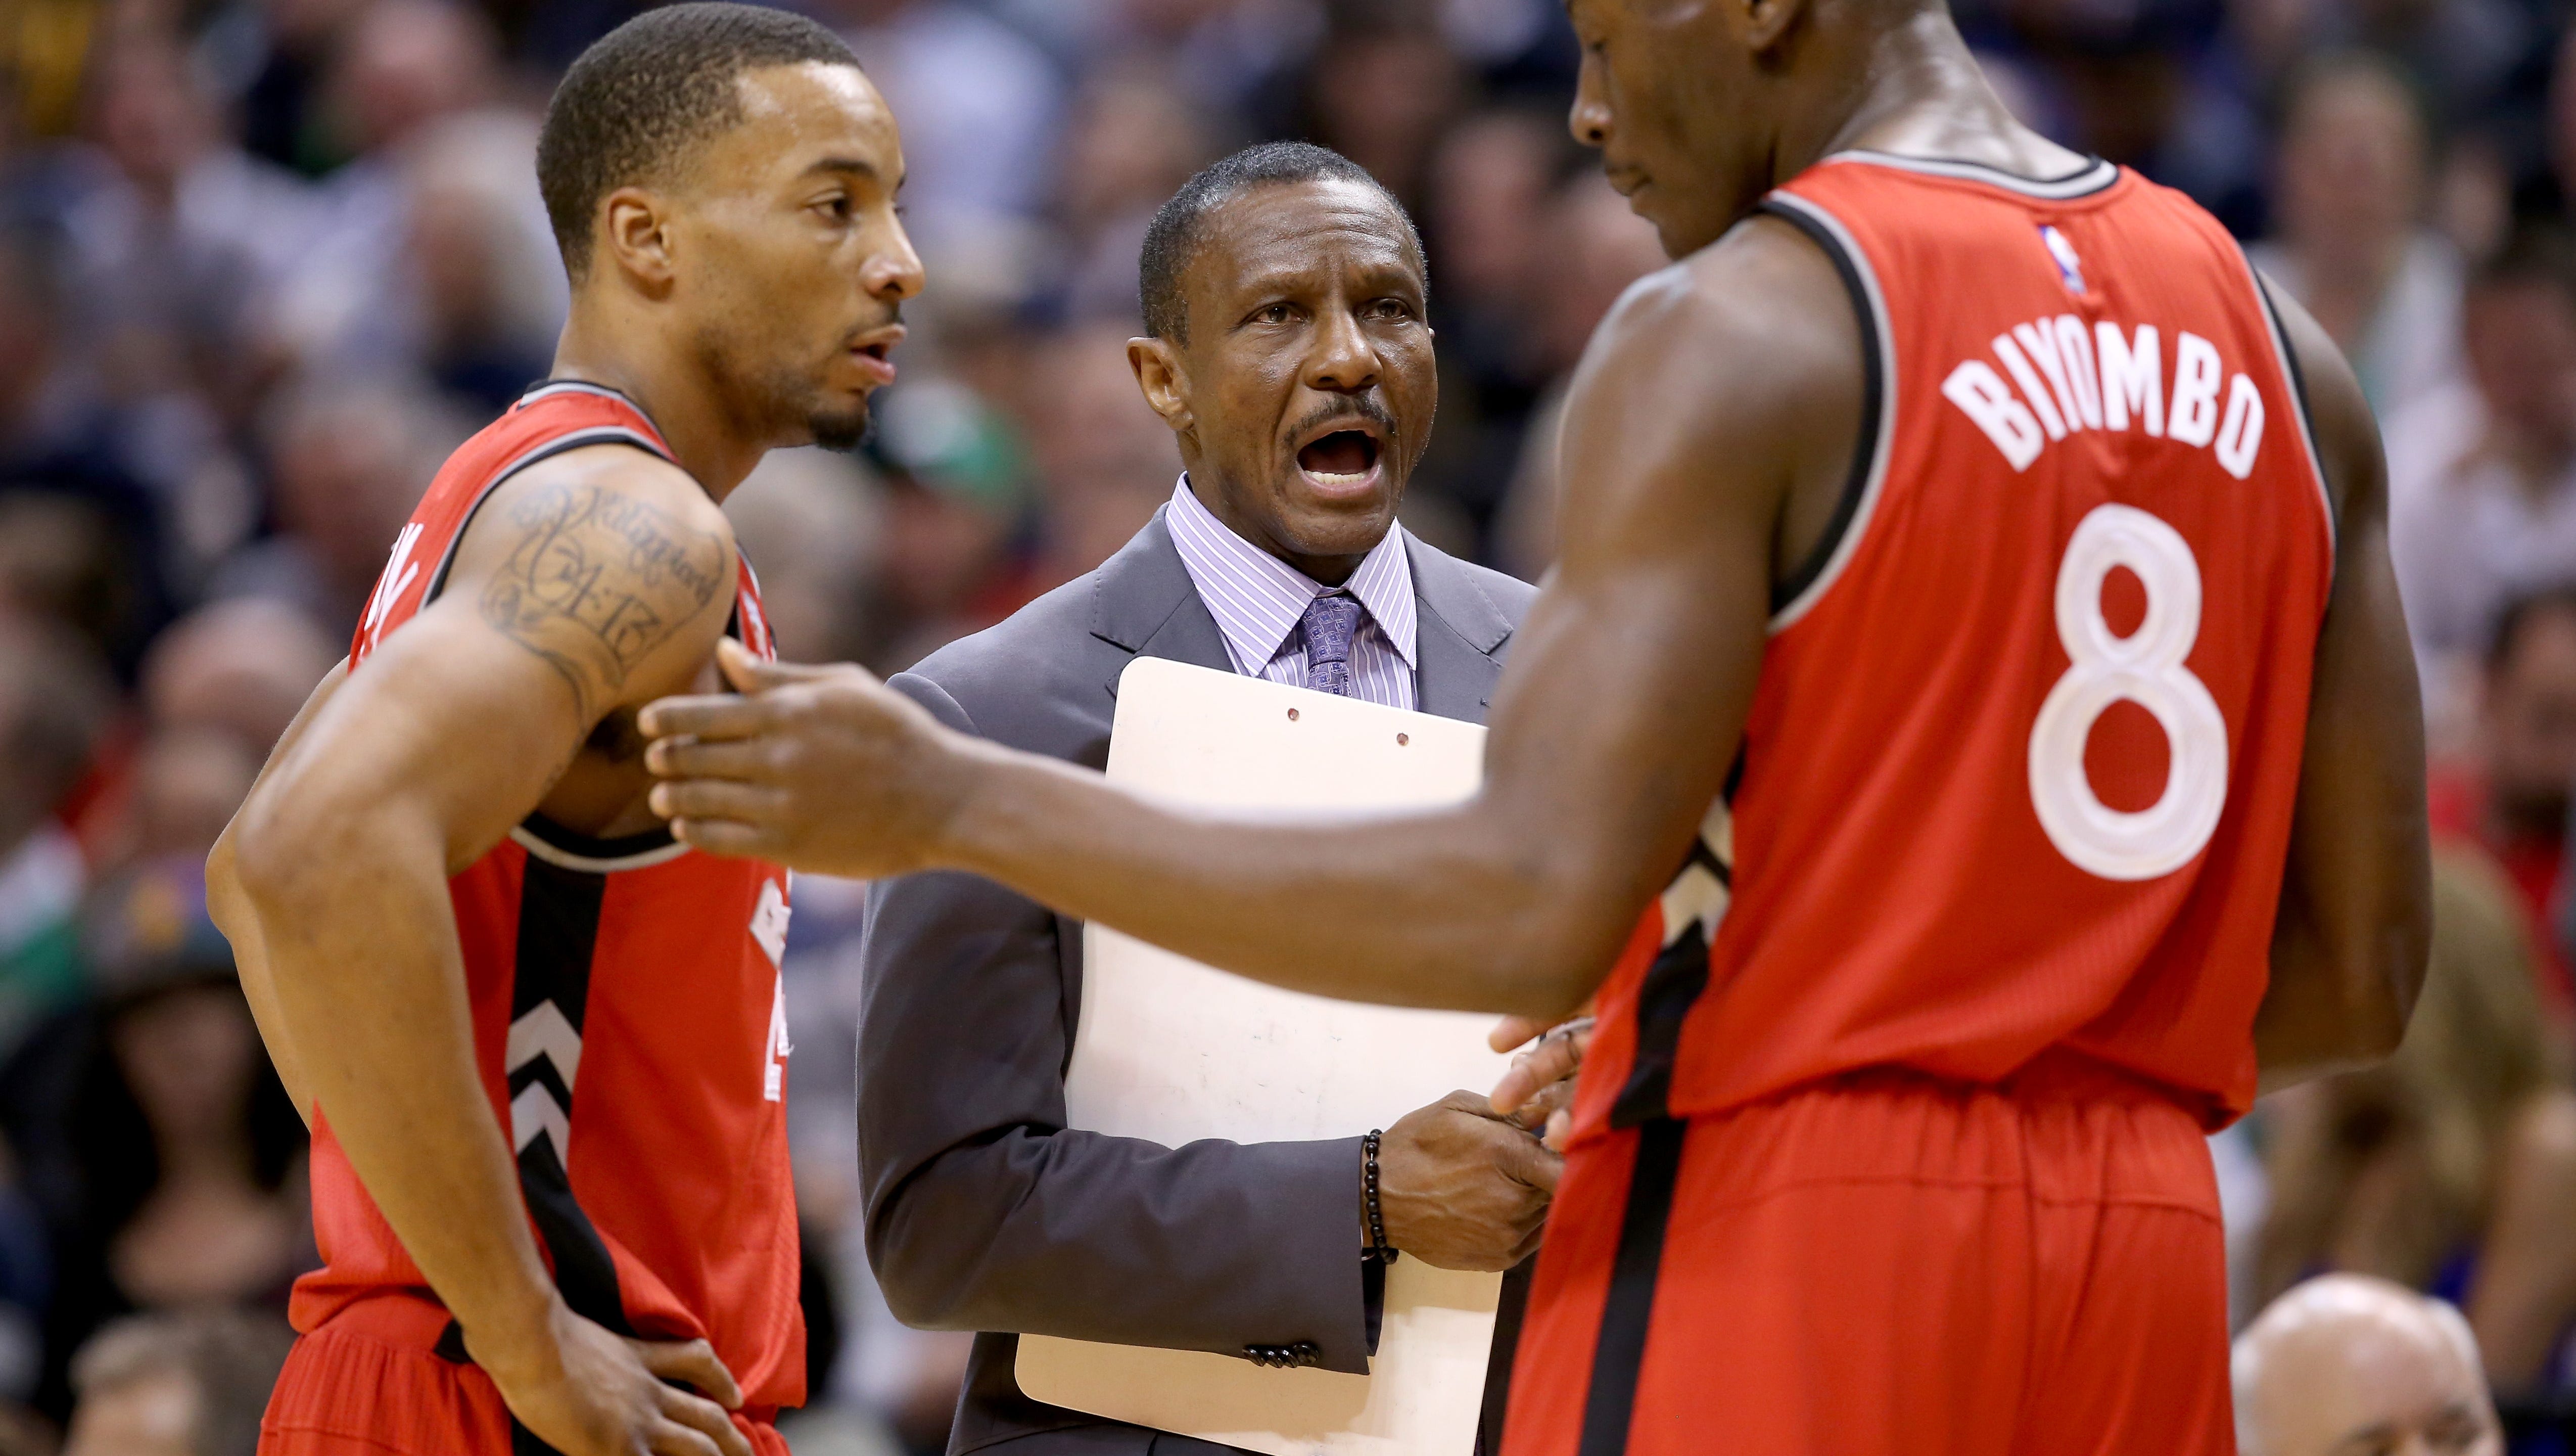 Dwane Casey the head coach of the Toronto Raptors gives instructions to his team against the Indiana Pacers during the game at Bankers Life Fieldhouse on March 17, 2016 in Indianapolis, Indiana.